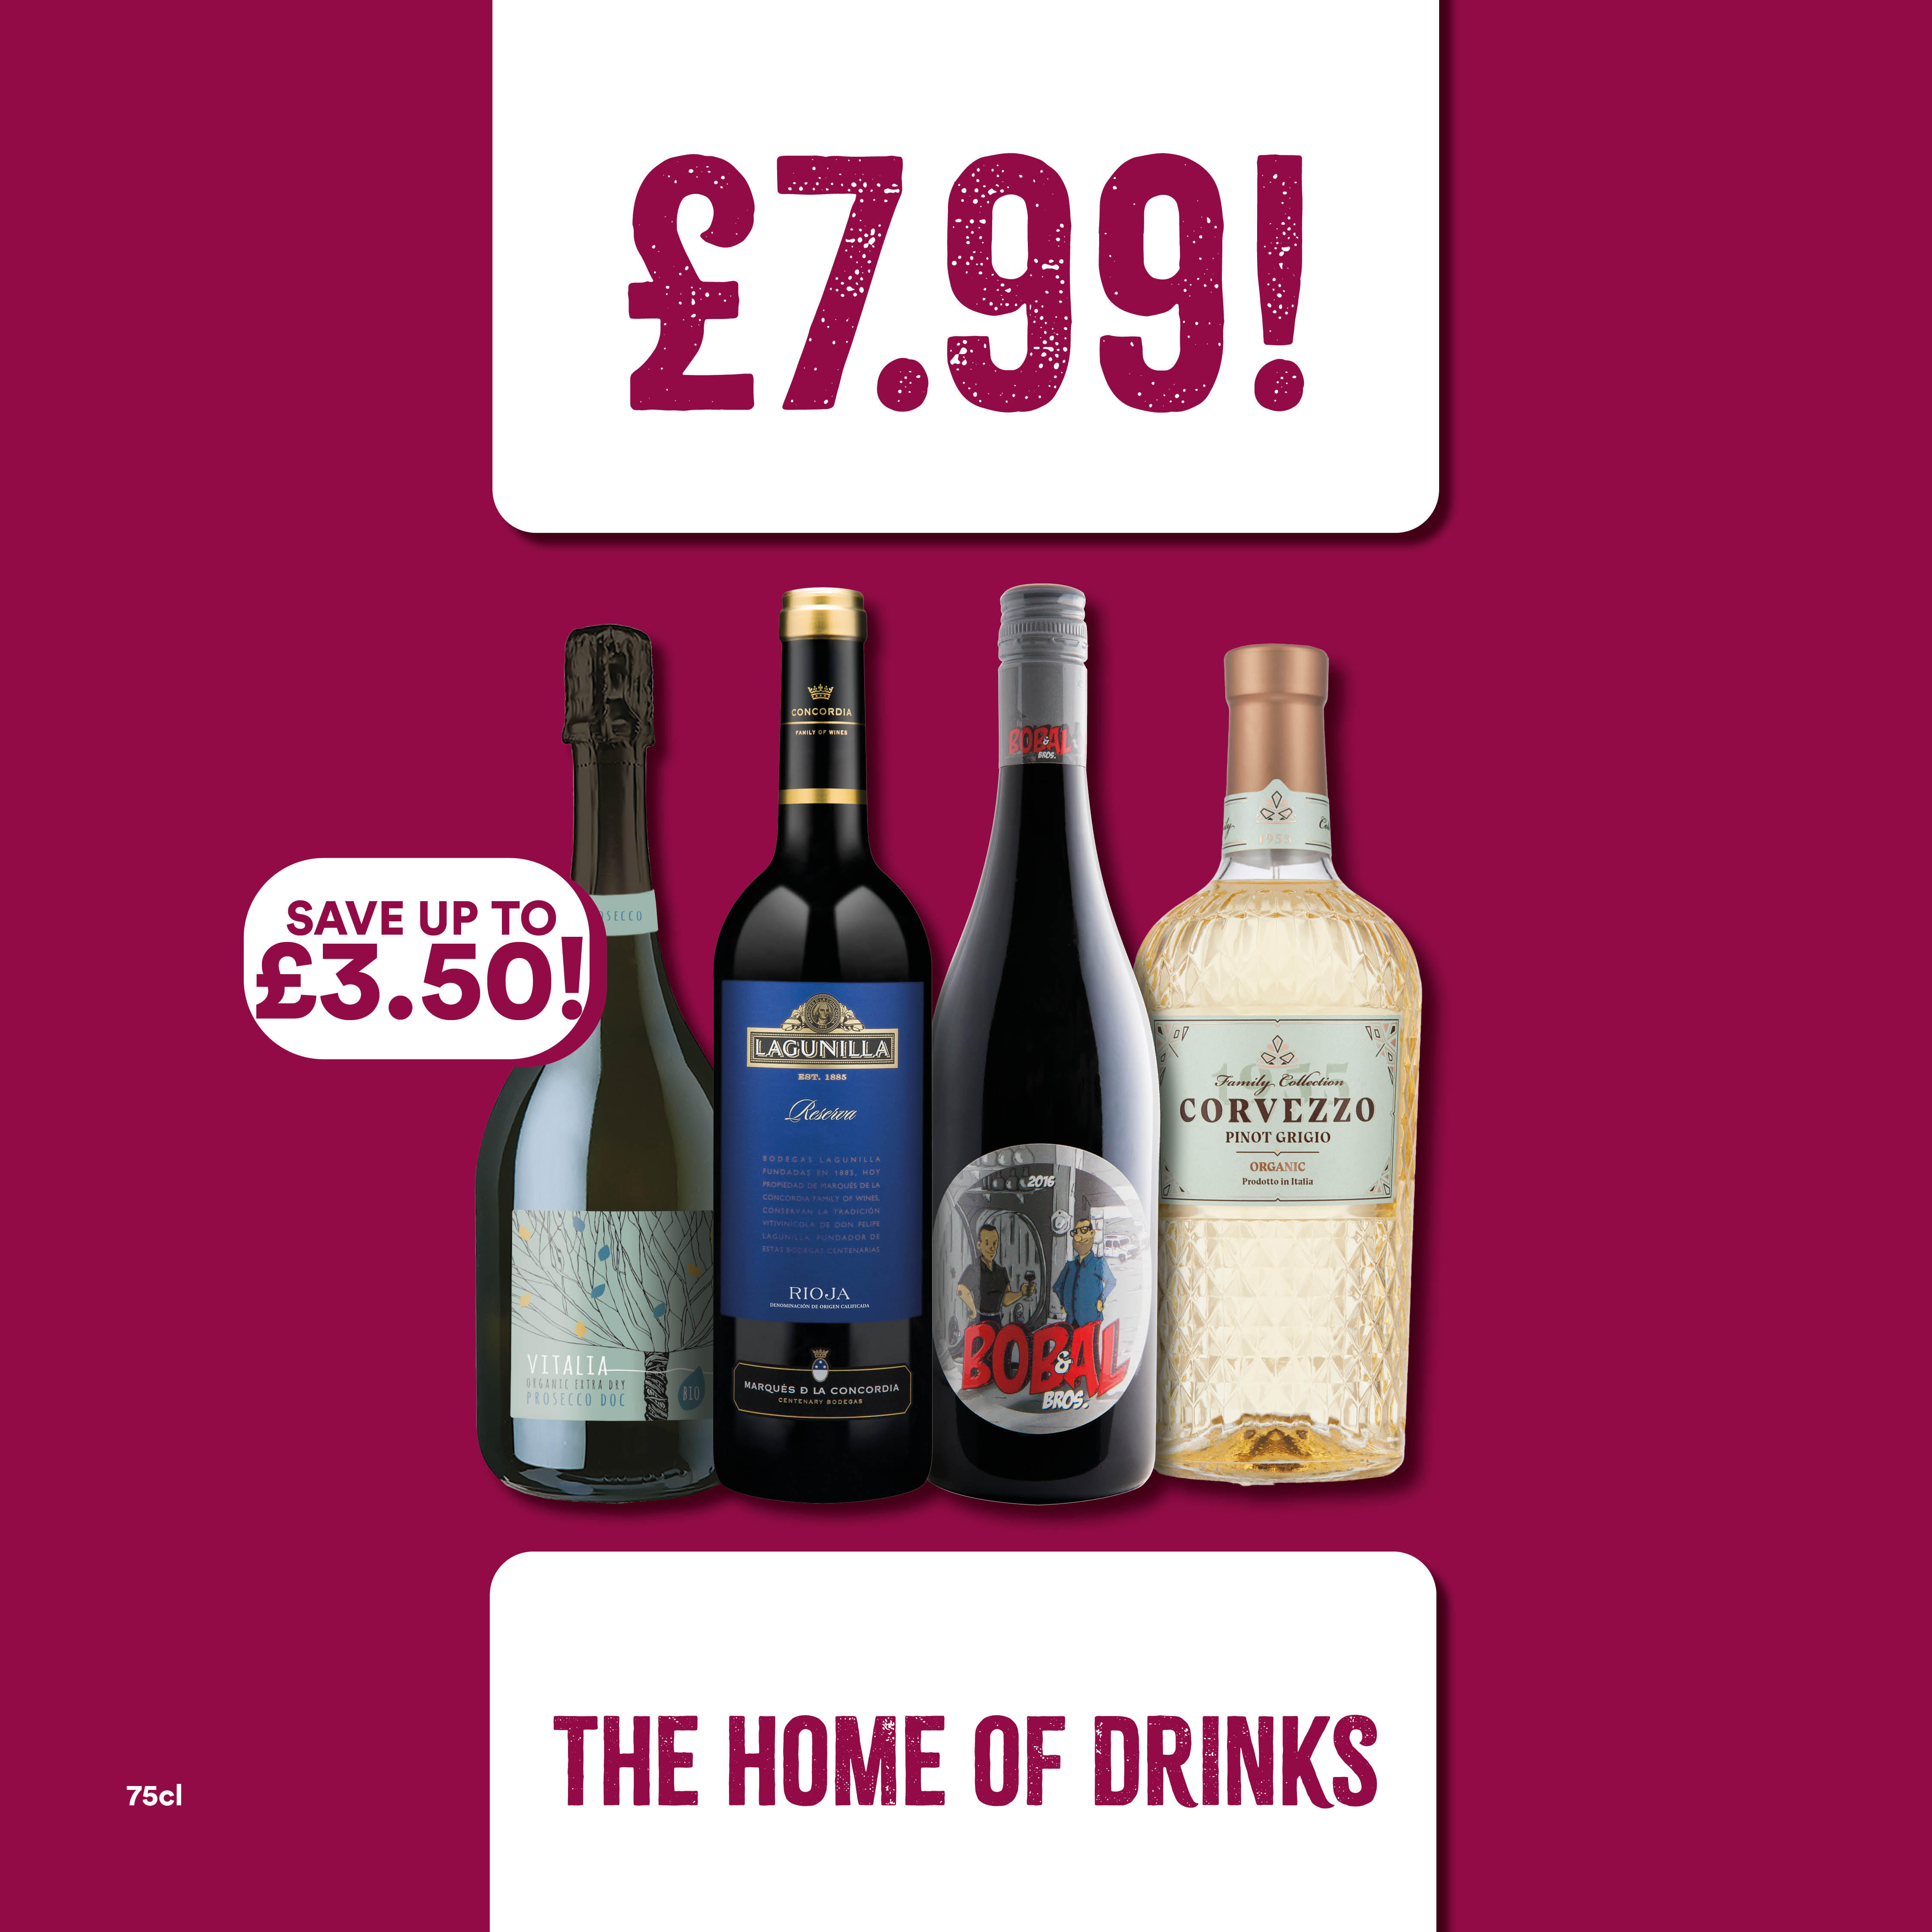 £7.99 on selected wines Bargain Booze Newport Pagnell 01908 612653